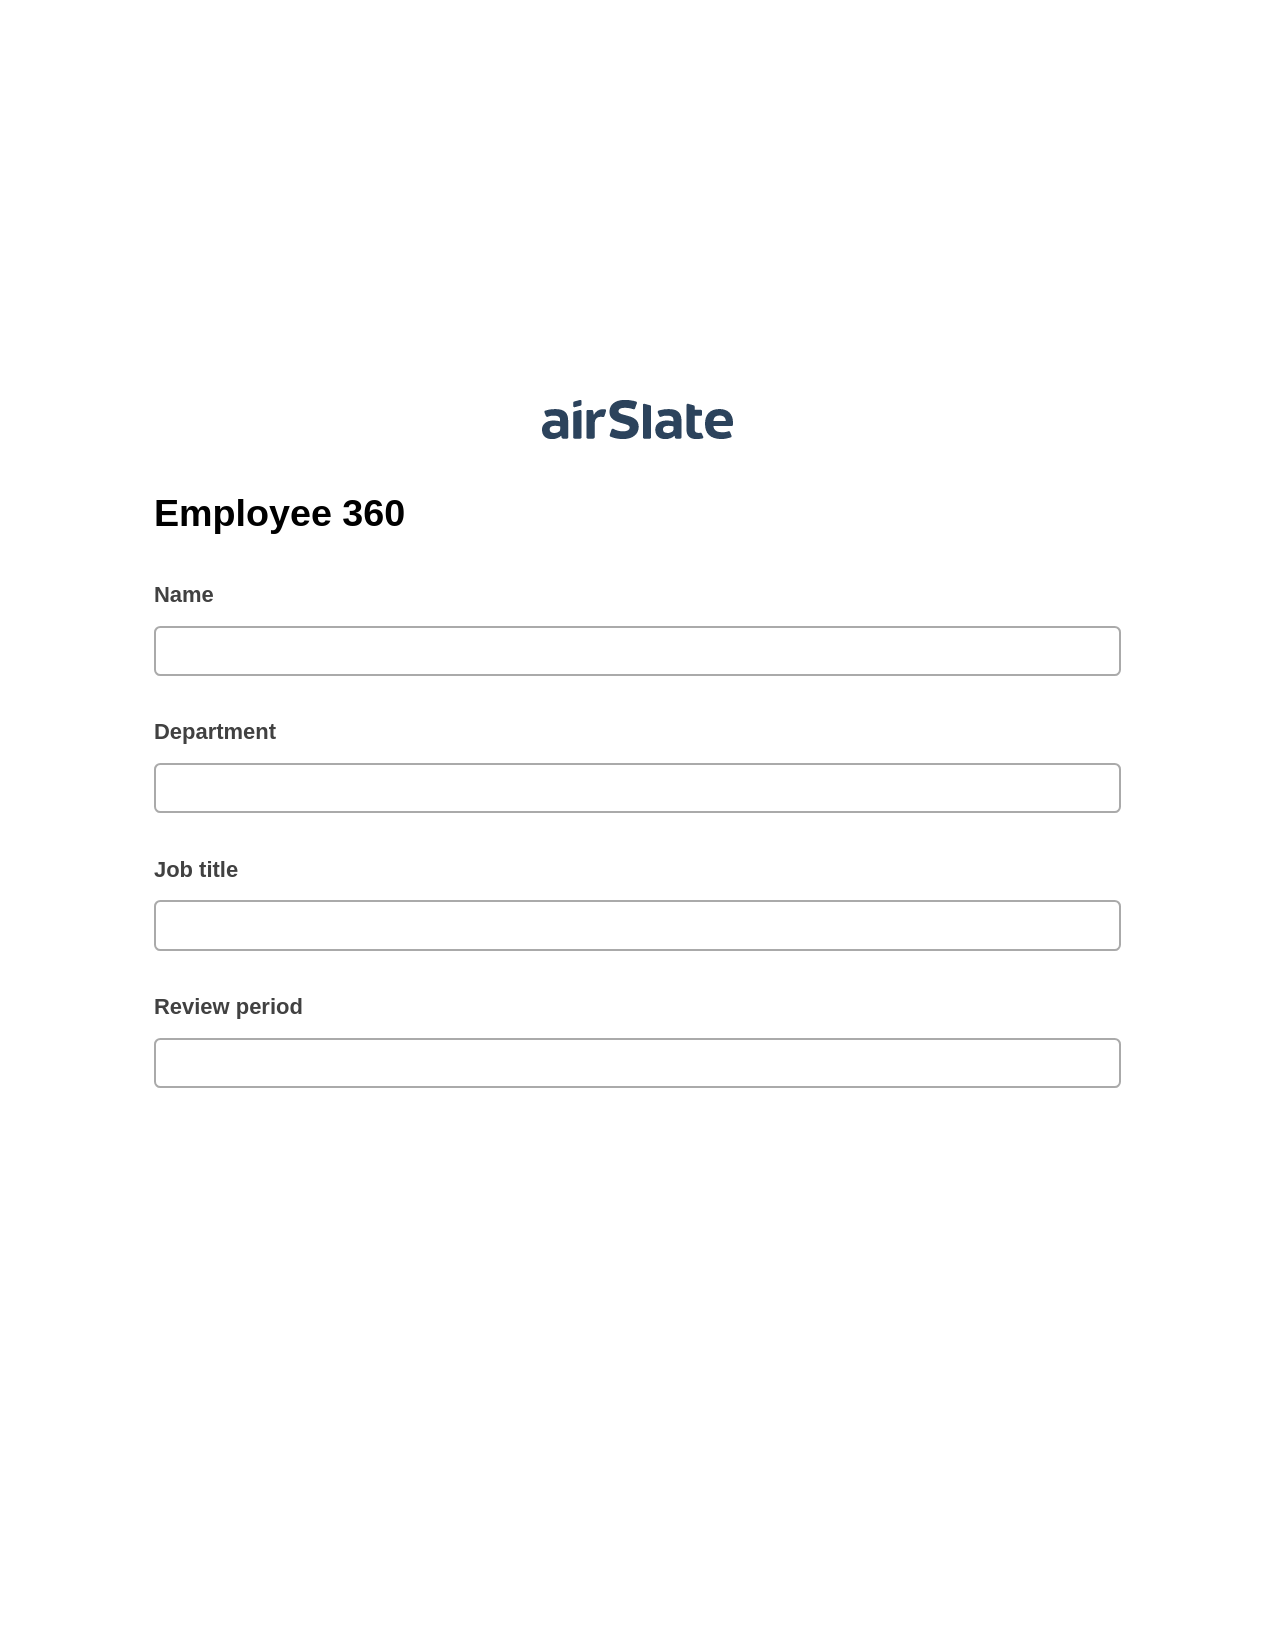 Multirole Employee 360 Pre-fill from CSV File Bot, Create slate from another Flow Bot, Post-finish Document Bot